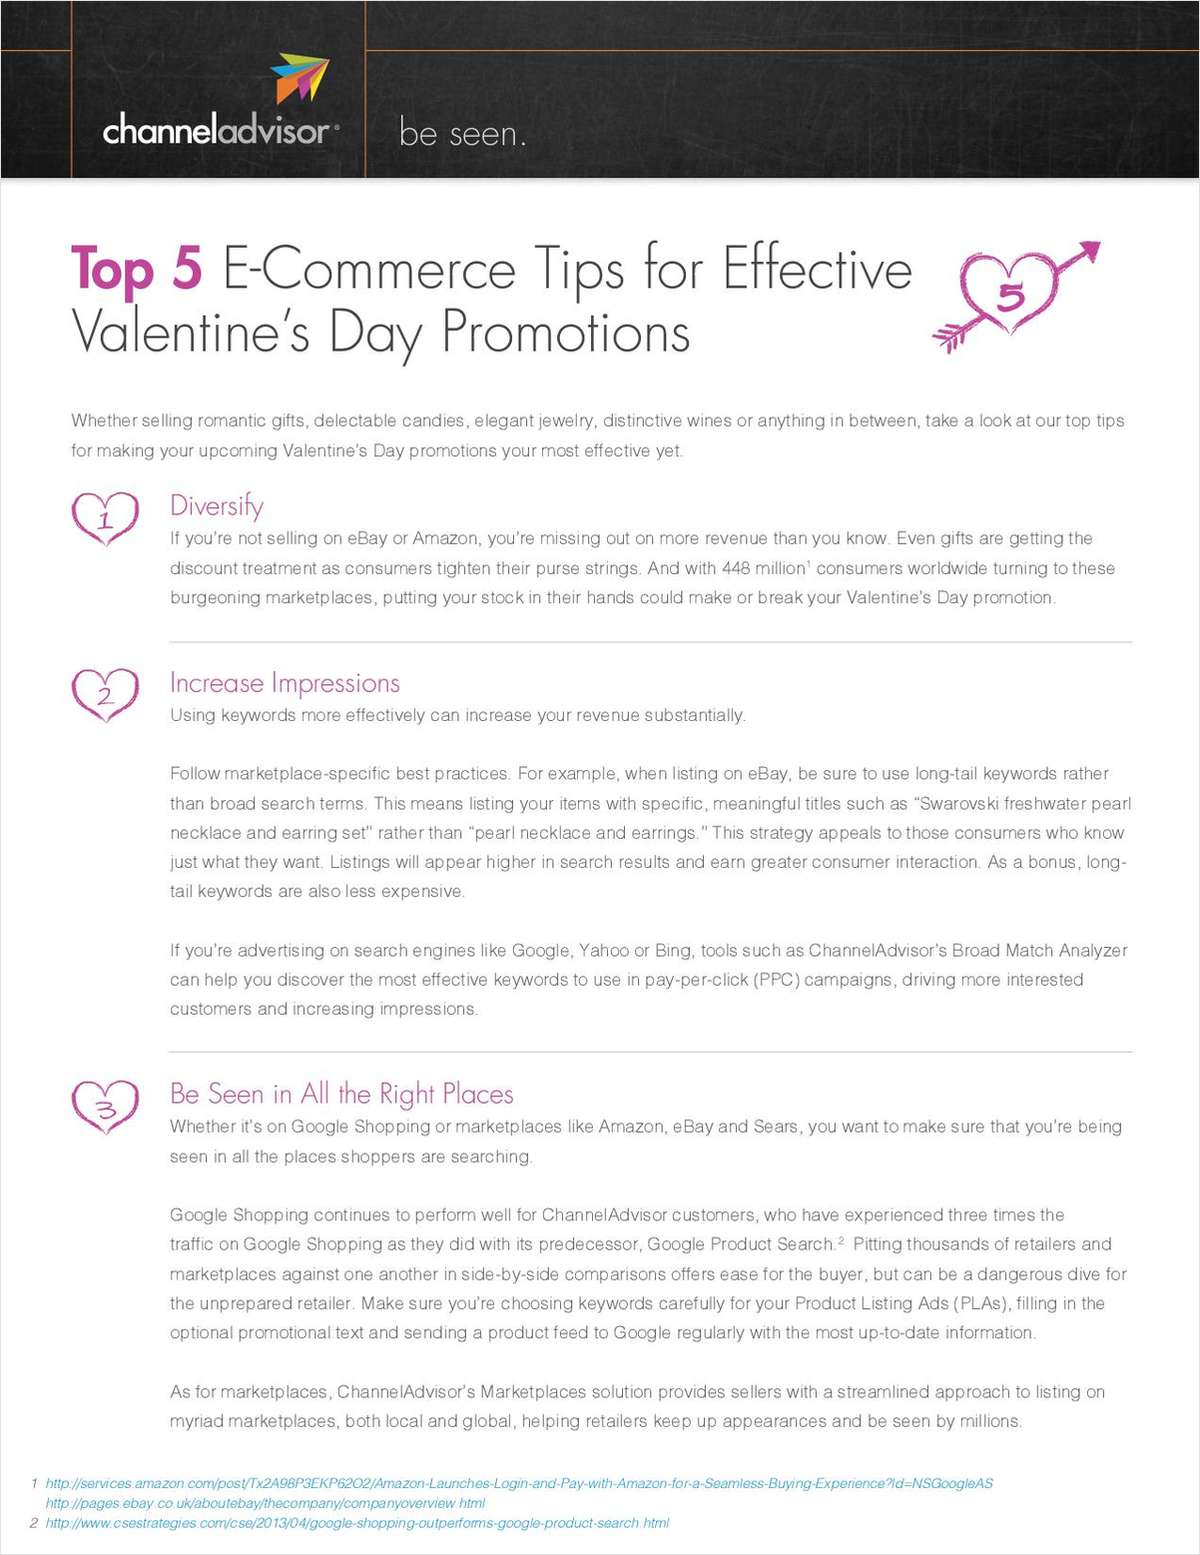 Tips for Effective Valentine's Day Promotions